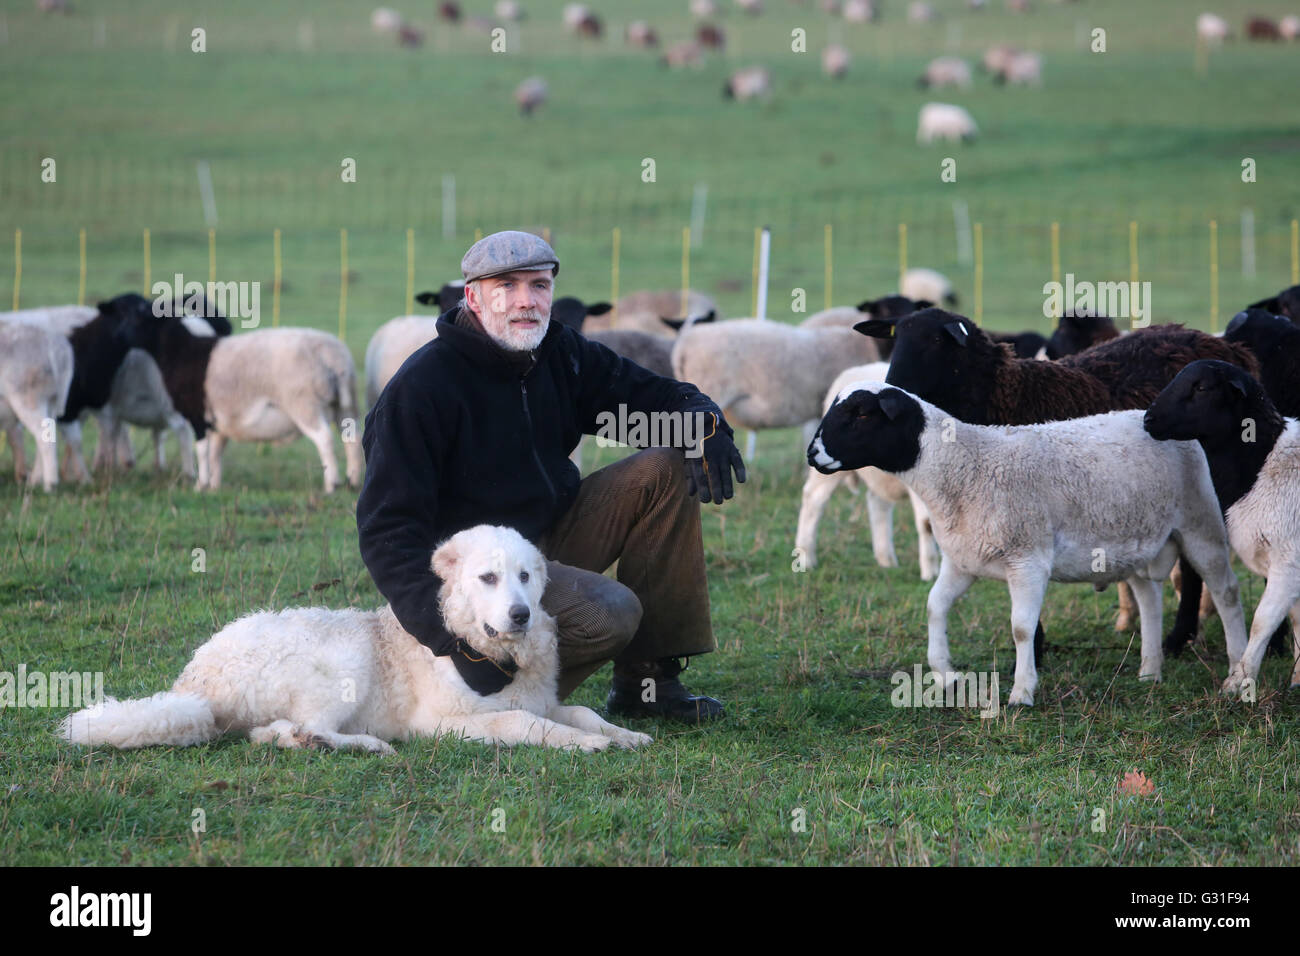 New K twin, Germany, farmer sitting with his Pyrenaeenberghund amidst a flock of sheep Stock Photo